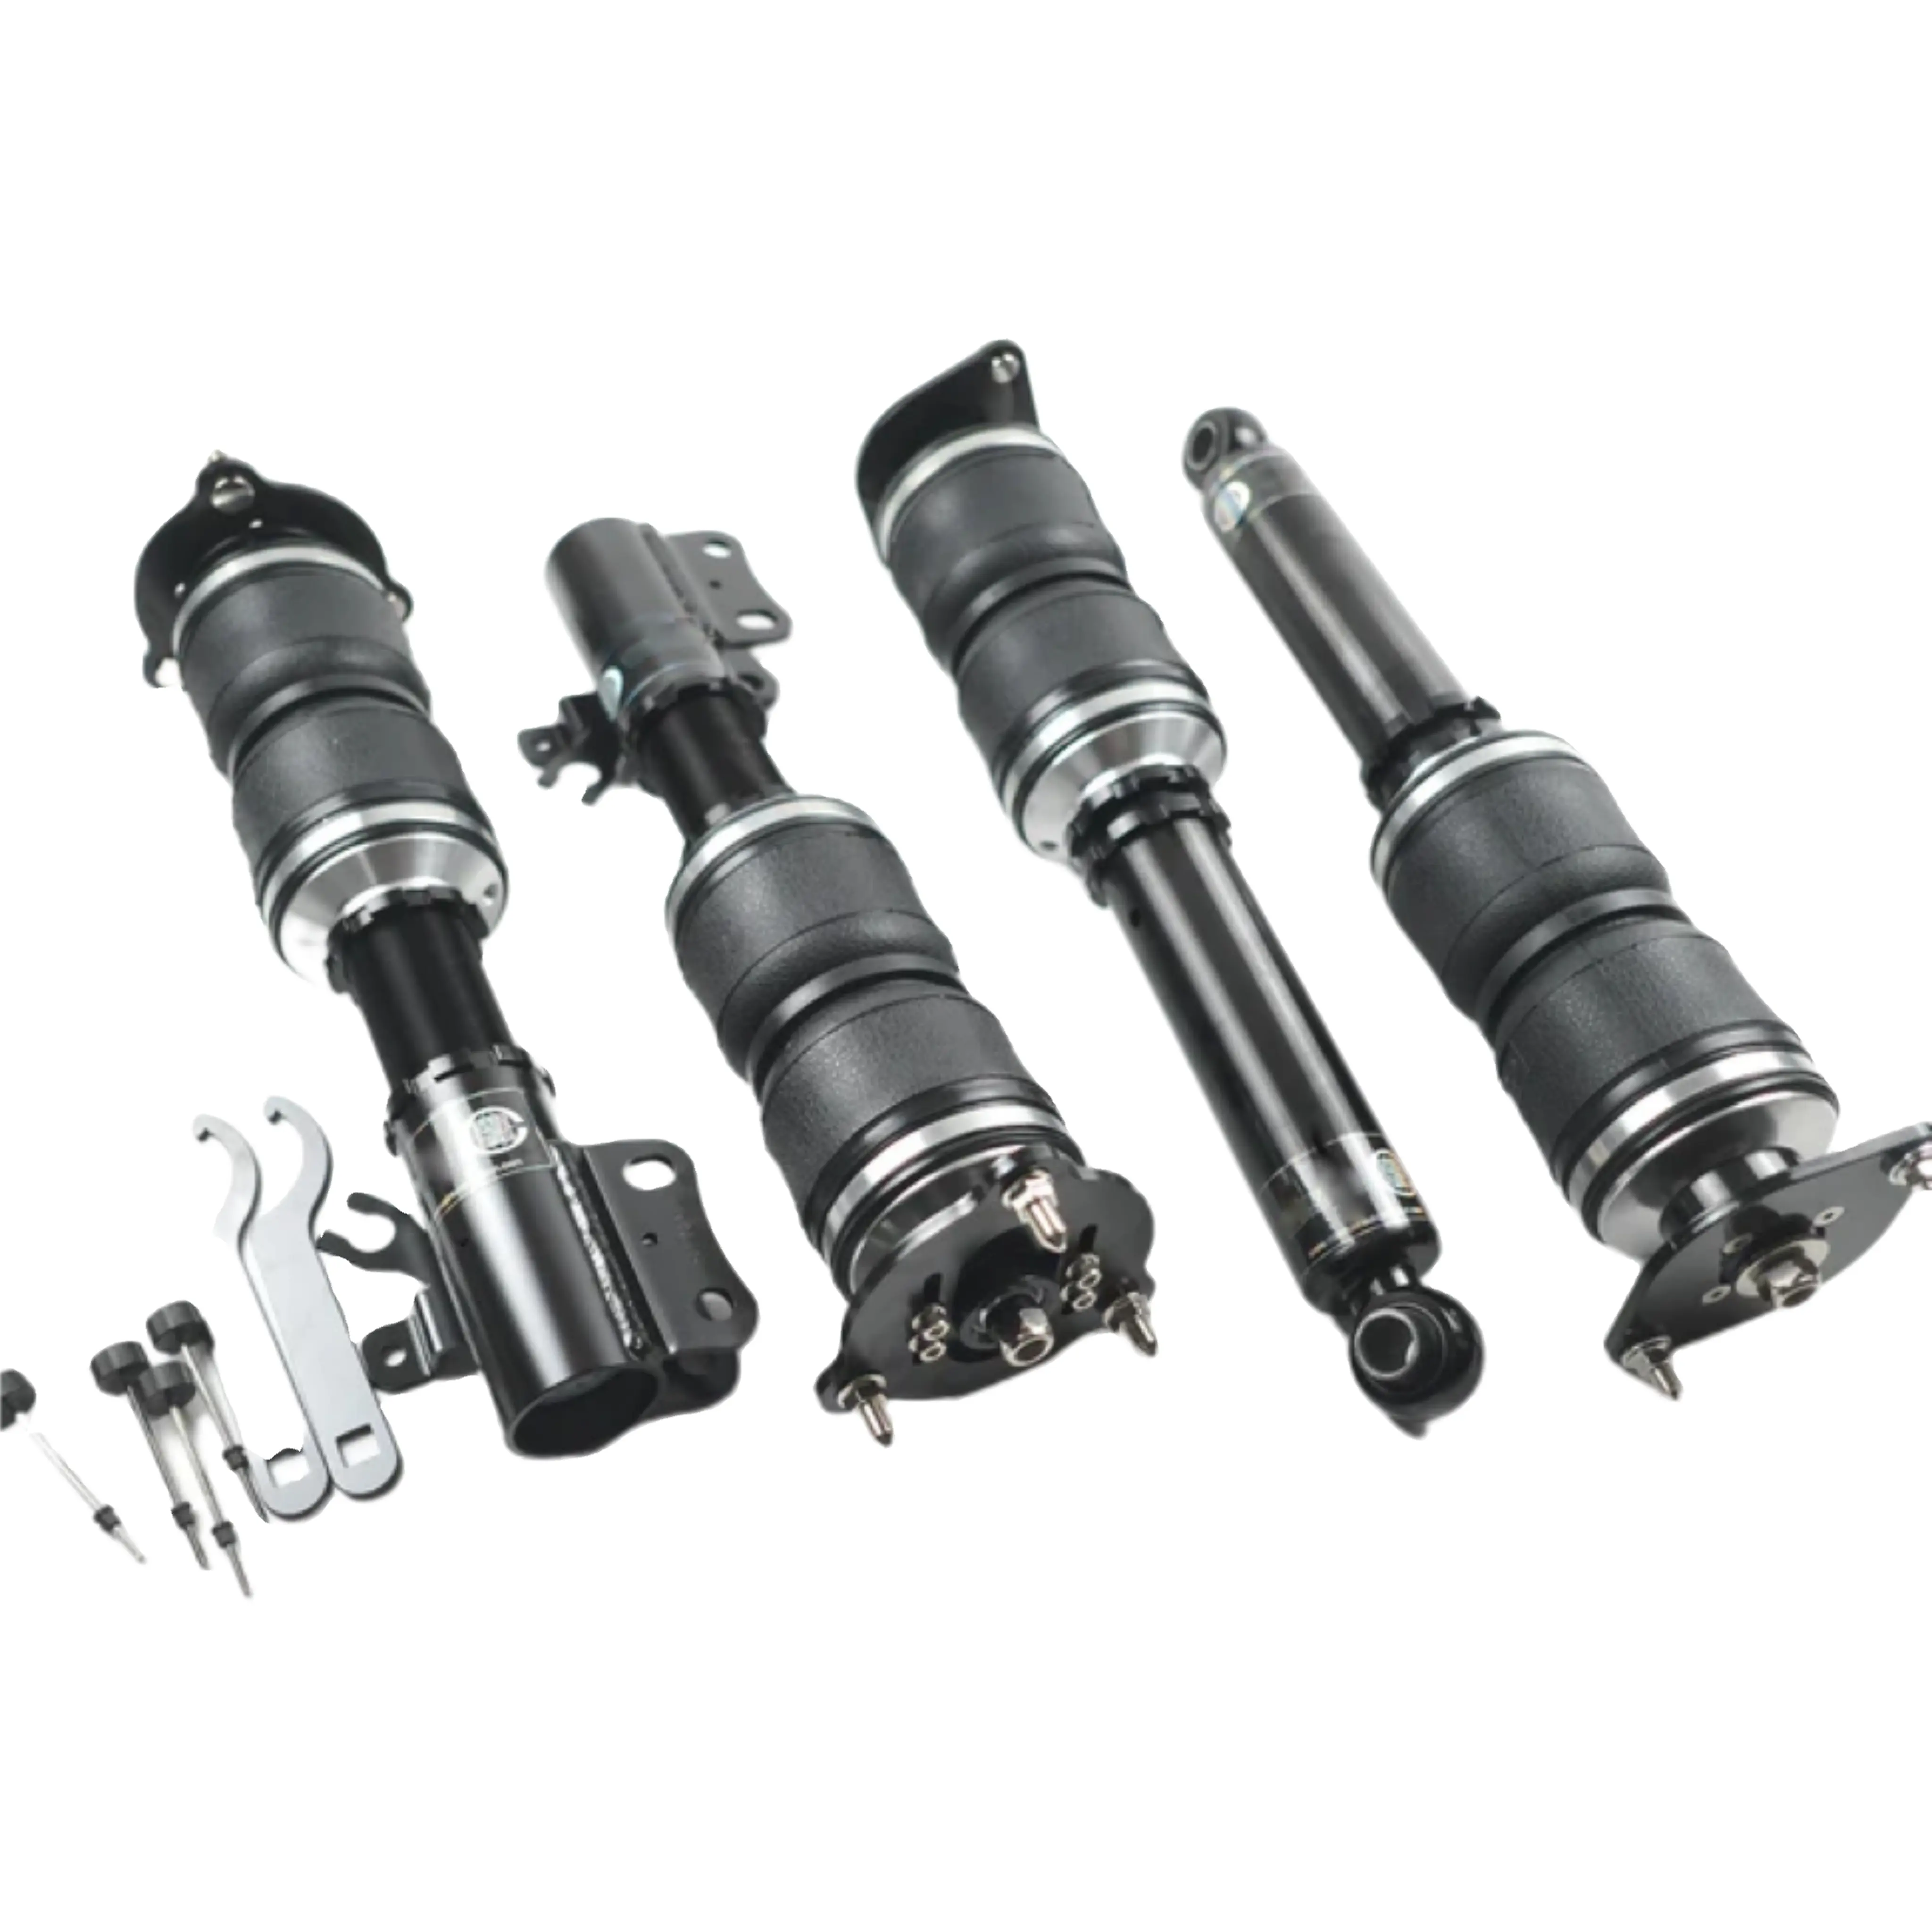 Silvia S15 1999 to 2002 Air Suspension Support Kit/air shock absorber airlift